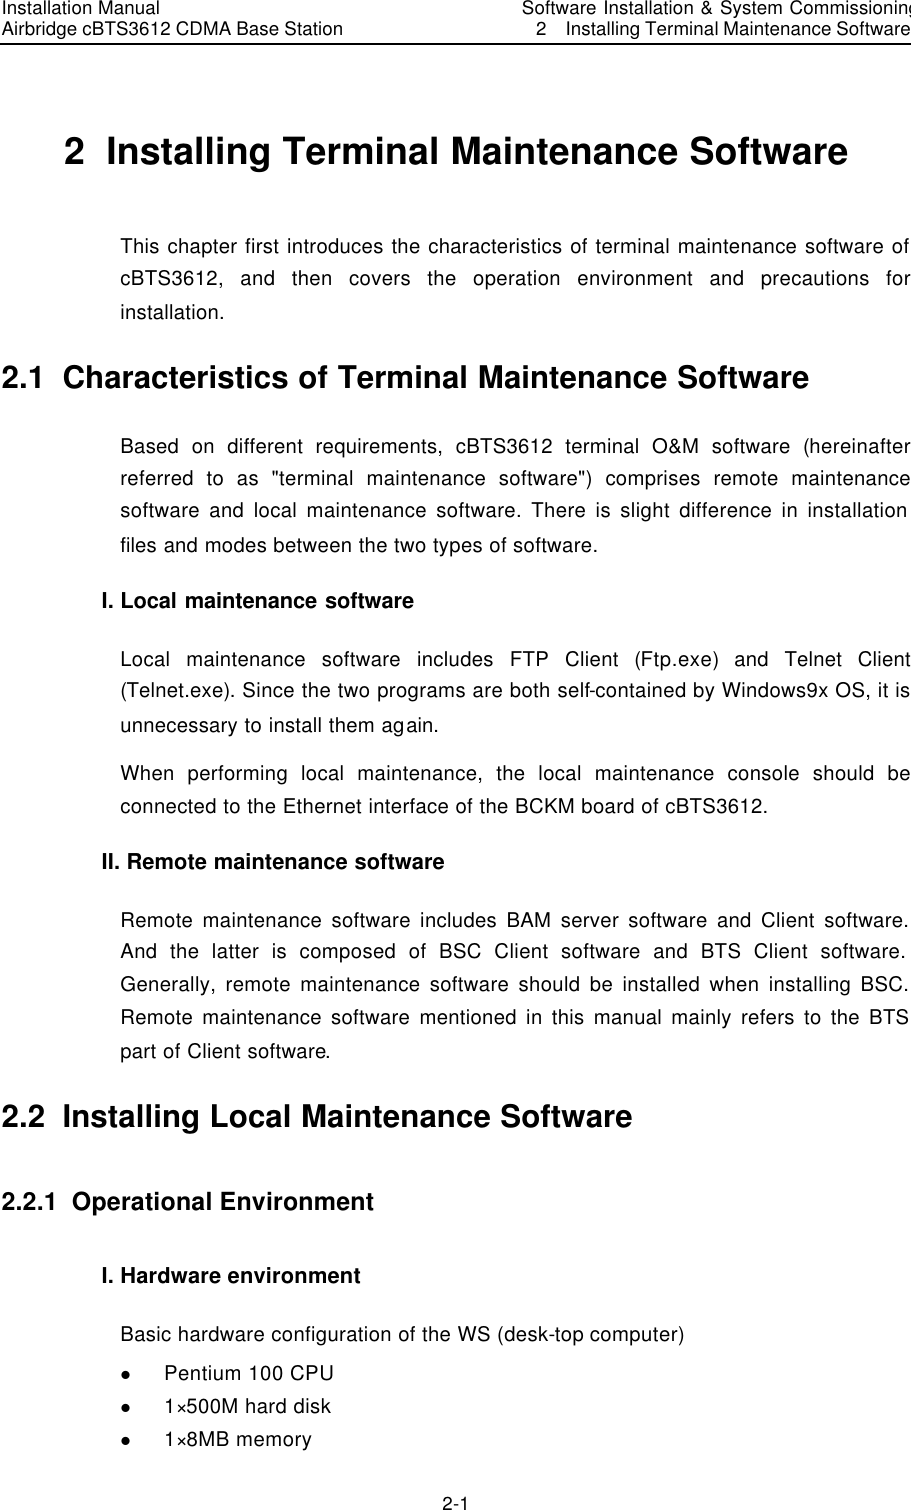 Installation Manual   Airbridge cBTS3612 CDMA Base Station  　Software Installation &amp; System Commissioning   2  Installing Terminal Maintenance Software　2-1　2  Installing Terminal Maintenance Software This chapter first introduces the characteristics of terminal maintenance software of cBTS3612, and then covers the operation environment and precautions for installation.   2.1  Characteristics of Terminal Maintenance Software Based on different requirements, cBTS3612 terminal O&amp;M software (hereinafter referred to as &quot;terminal maintenance software&quot;) comprises remote maintenance software and local maintenance software. There is slight difference in installation files and modes between the two types of software. I. Local maintenance software Local maintenance software includes FTP Client (Ftp.exe) and Telnet Client (Telnet.exe). Since the two programs are both self-contained by Windows9x OS, it is unnecessary to install them again.   When performing local maintenance, the local maintenance console should be connected to the Ethernet interface of the BCKM board of cBTS3612.   II. Remote maintenance software   Remote maintenance software includes BAM server software and Client software. And the latter is composed of BSC Client software and BTS Client software. Generally, remote maintenance software should be installed when installing BSC. Remote maintenance software mentioned in this manual mainly refers to the BTS part of Client software. 2.2  Installing Local Maintenance Software 2.2.1  Operational Environment  I. Hardware environment Basic hardware configuration of the WS (desk-top computer)   l Pentium 100 CPU l 1×500M hard disk l 1×8MB memory   